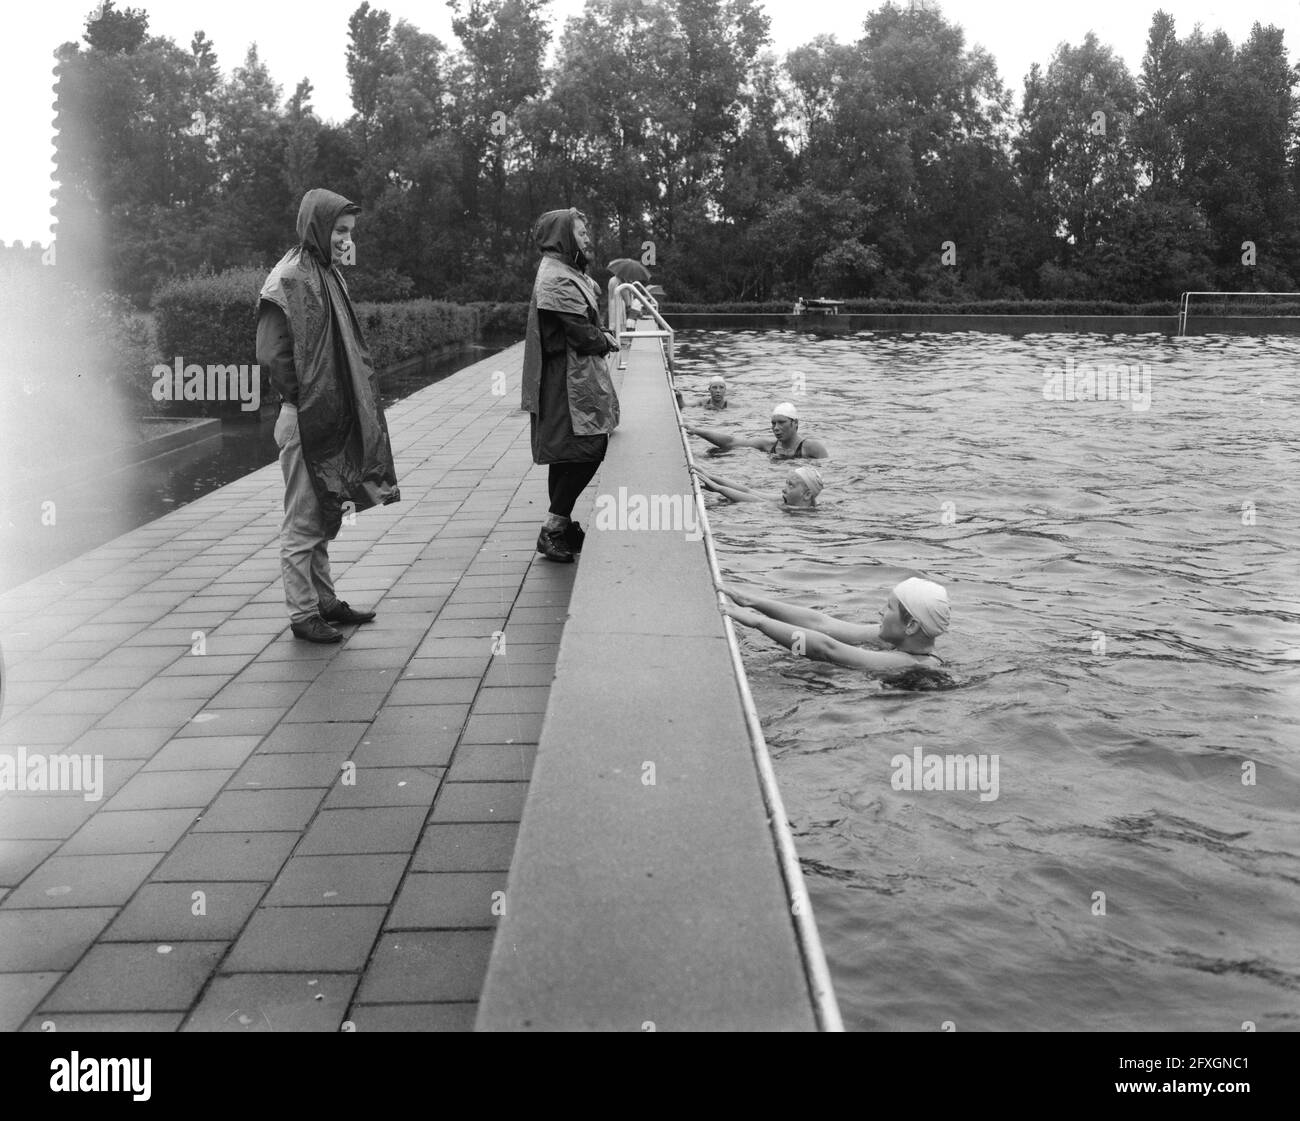 Four Naarden swimmers training for the Olympics, August 15, 1960, Olympics, training, The Netherlands, 20th century press agency photo, news to remember, documentary, historic photography 1945-1990, visual stories, human history of the Twentieth Century, capturing moments in time Stock Photo